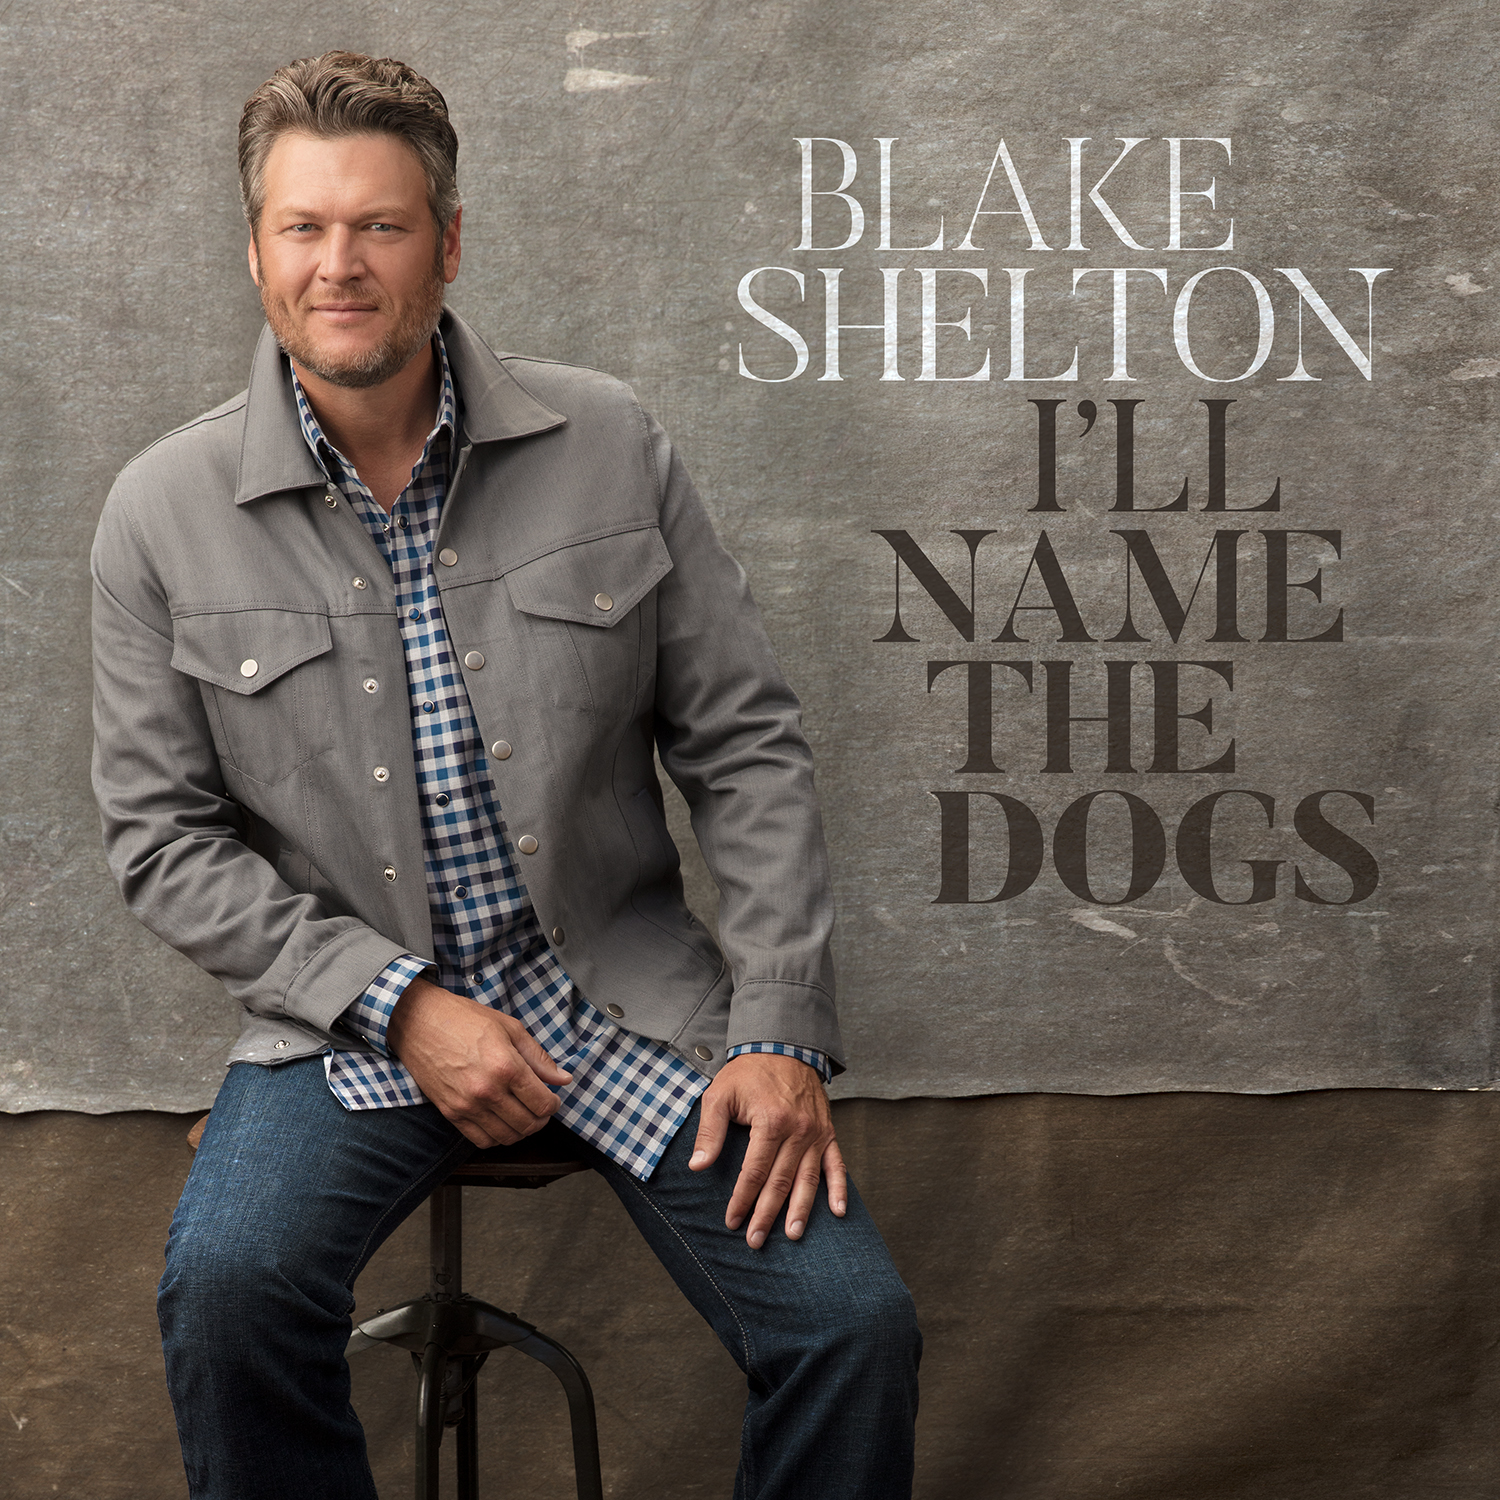 Blake Shelton Tallies Twenty-fifth Chart-topping Single With “I'll Name the Dogs” 